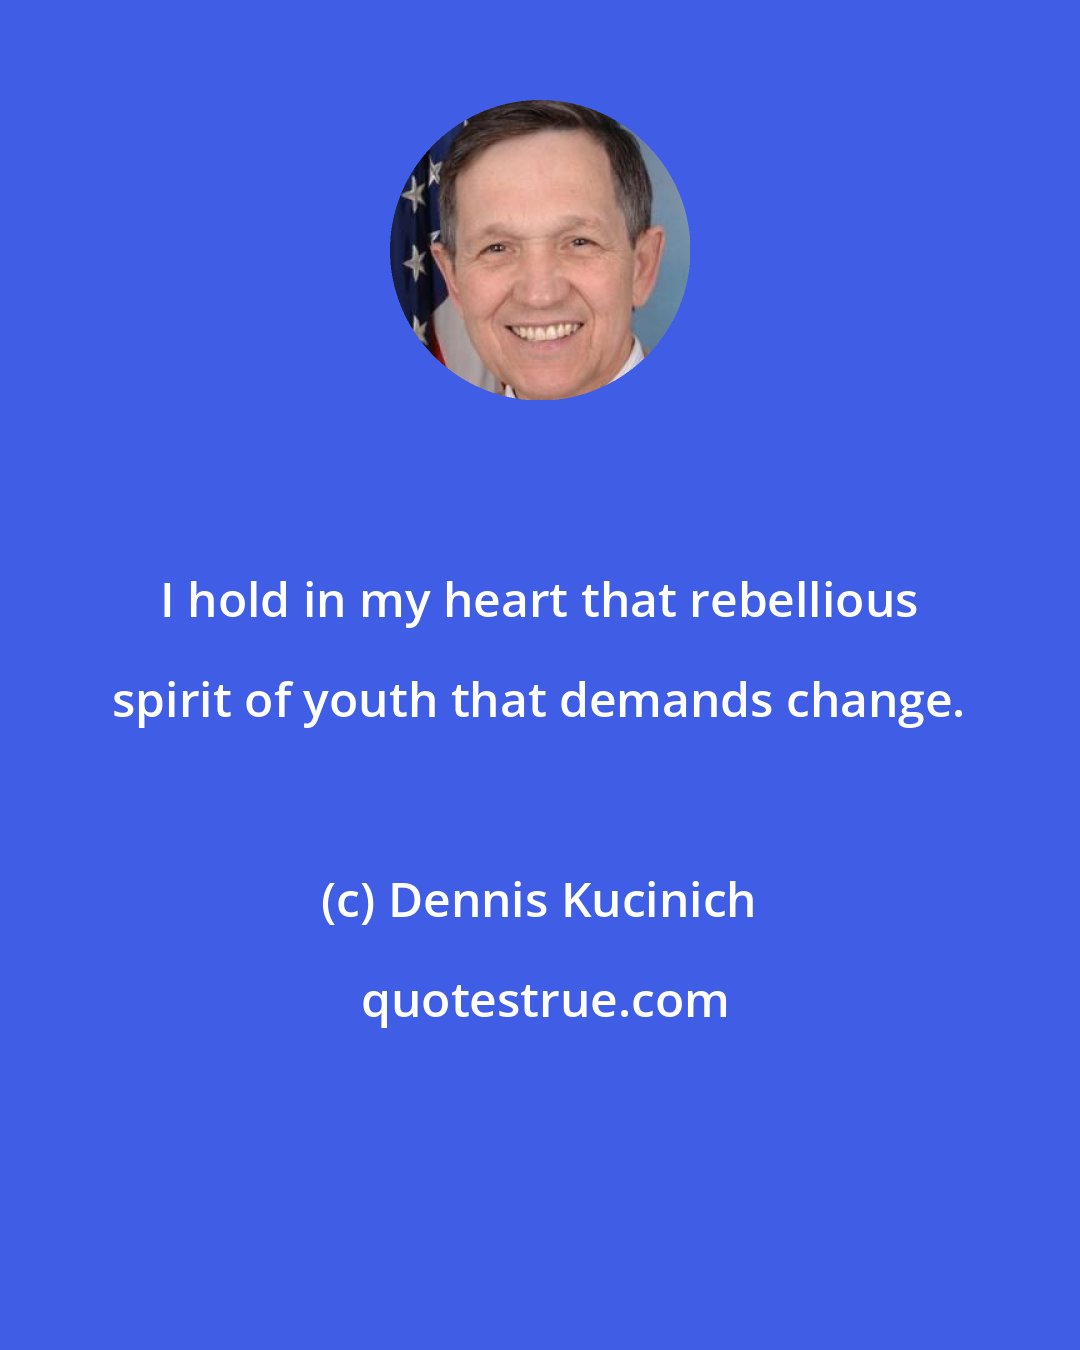 Dennis Kucinich: I hold in my heart that rebellious spirit of youth that demands change.